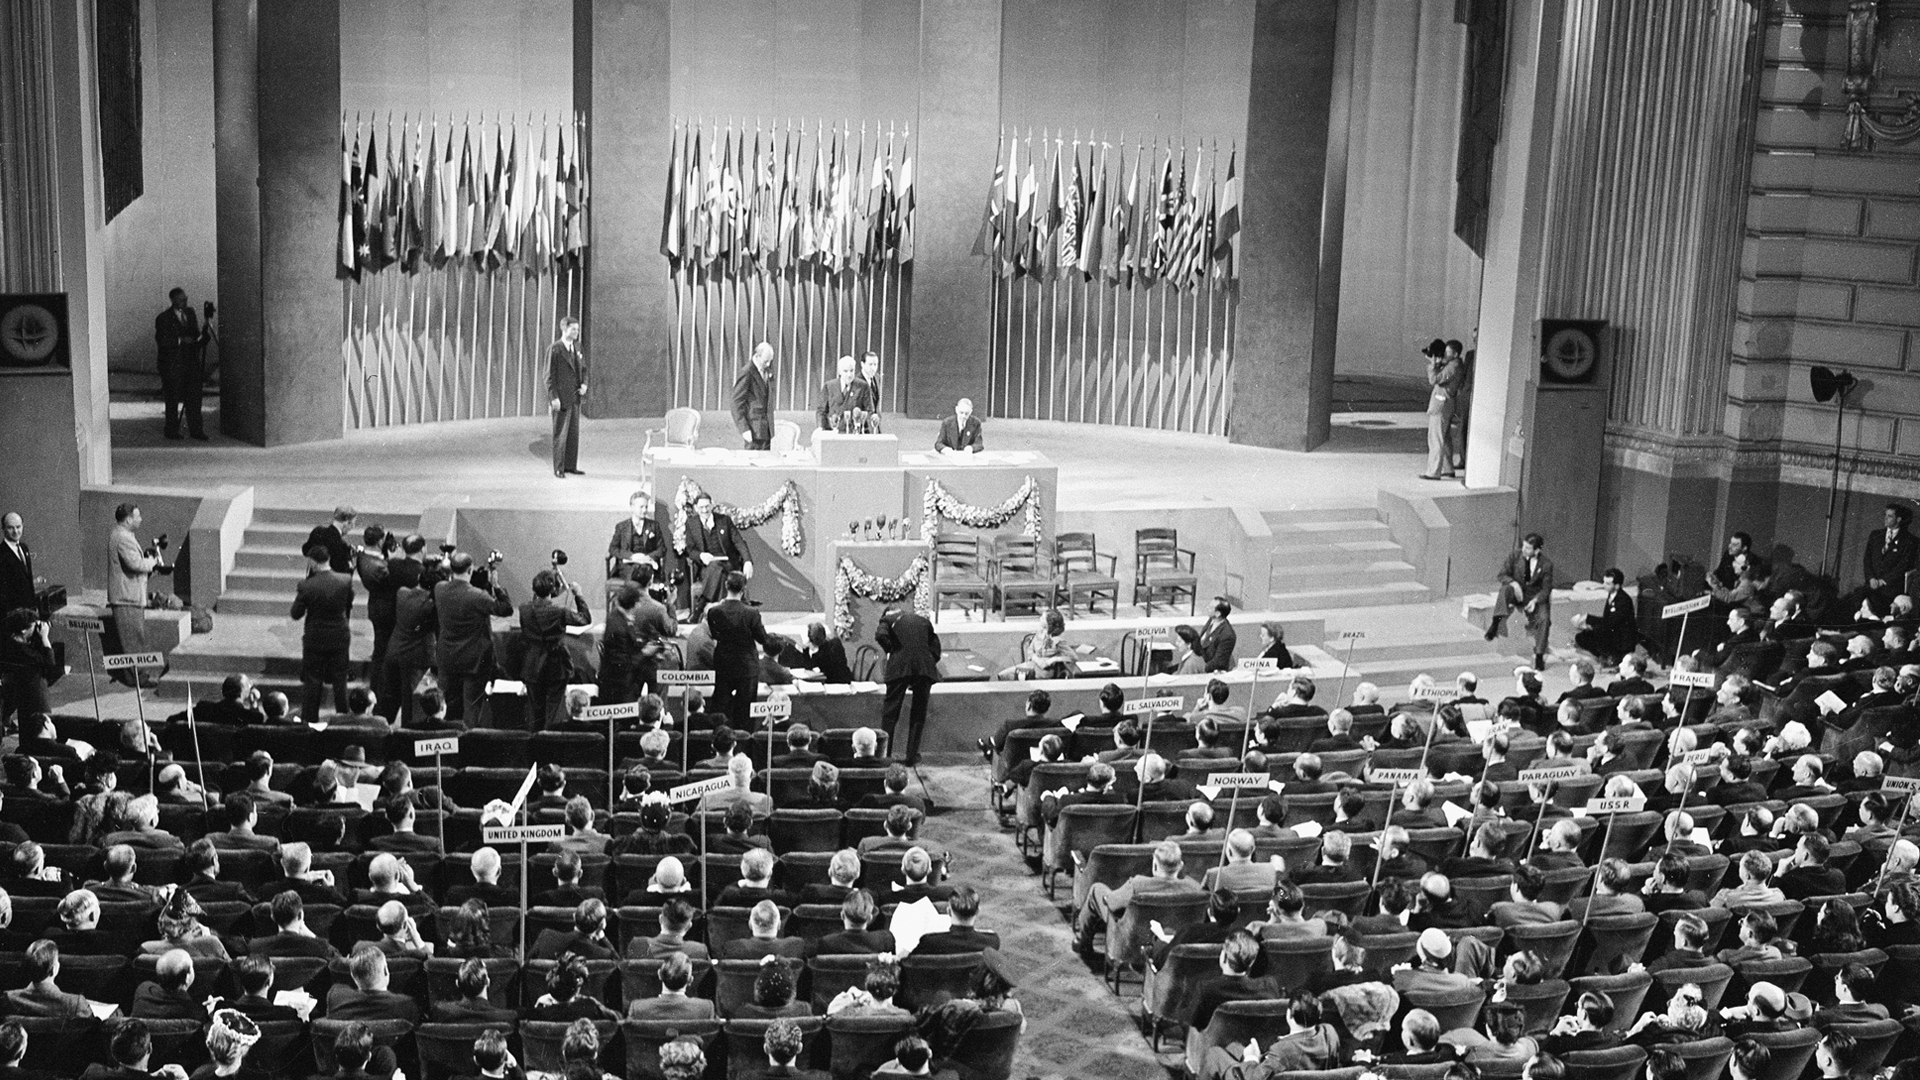 <p>Driven by the horrors of the Second World War and a desire to prevent another such conflict, fifty nations sign the United Nations Charter. On 24 October, the United Nations is officially formed in New York.</p>